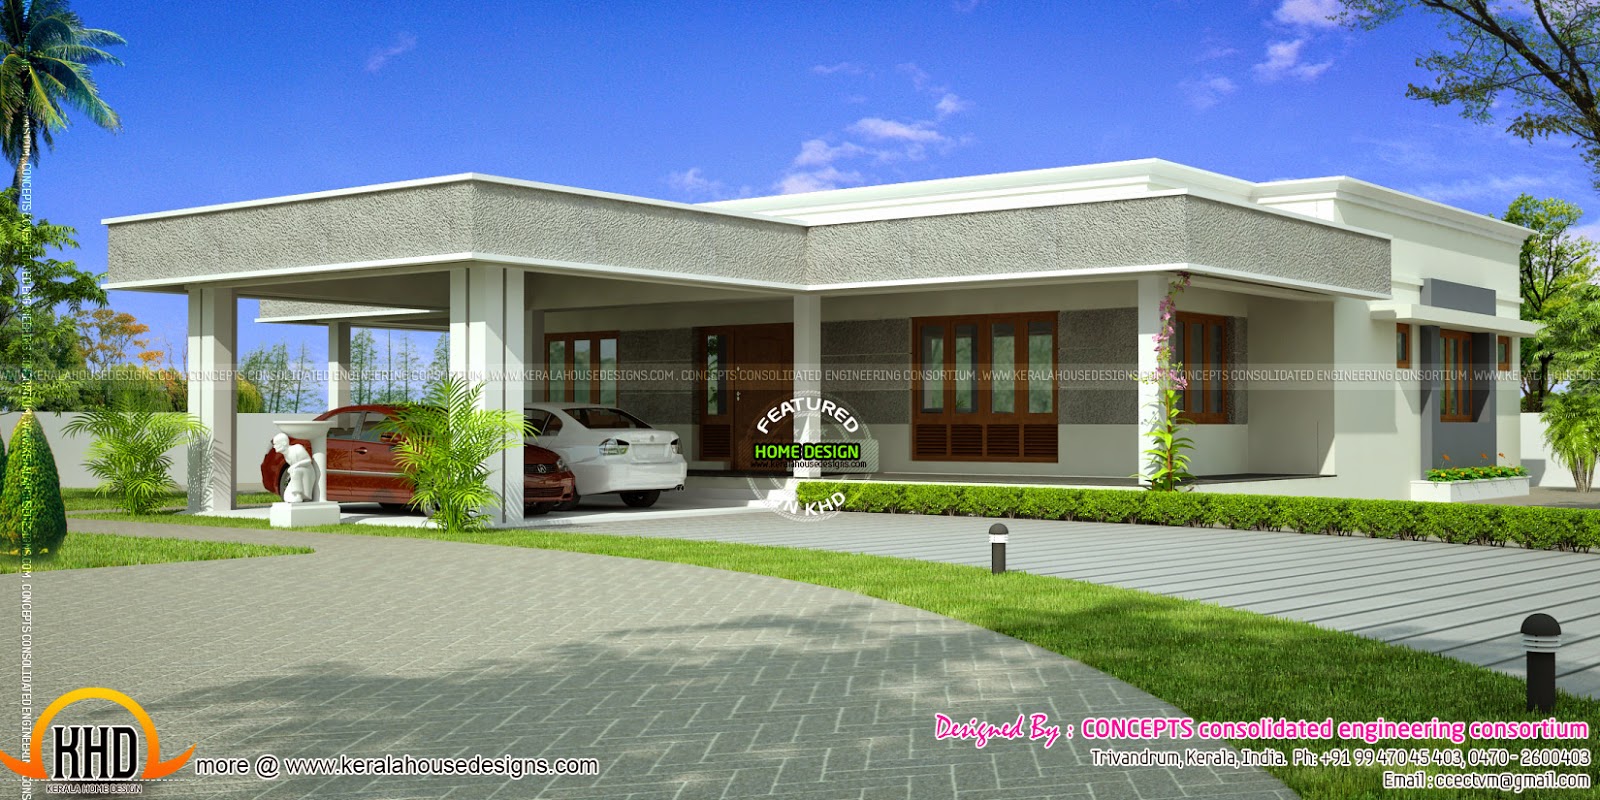 1365 sq ft 2  bedroom  small house  design keralahousedesigns